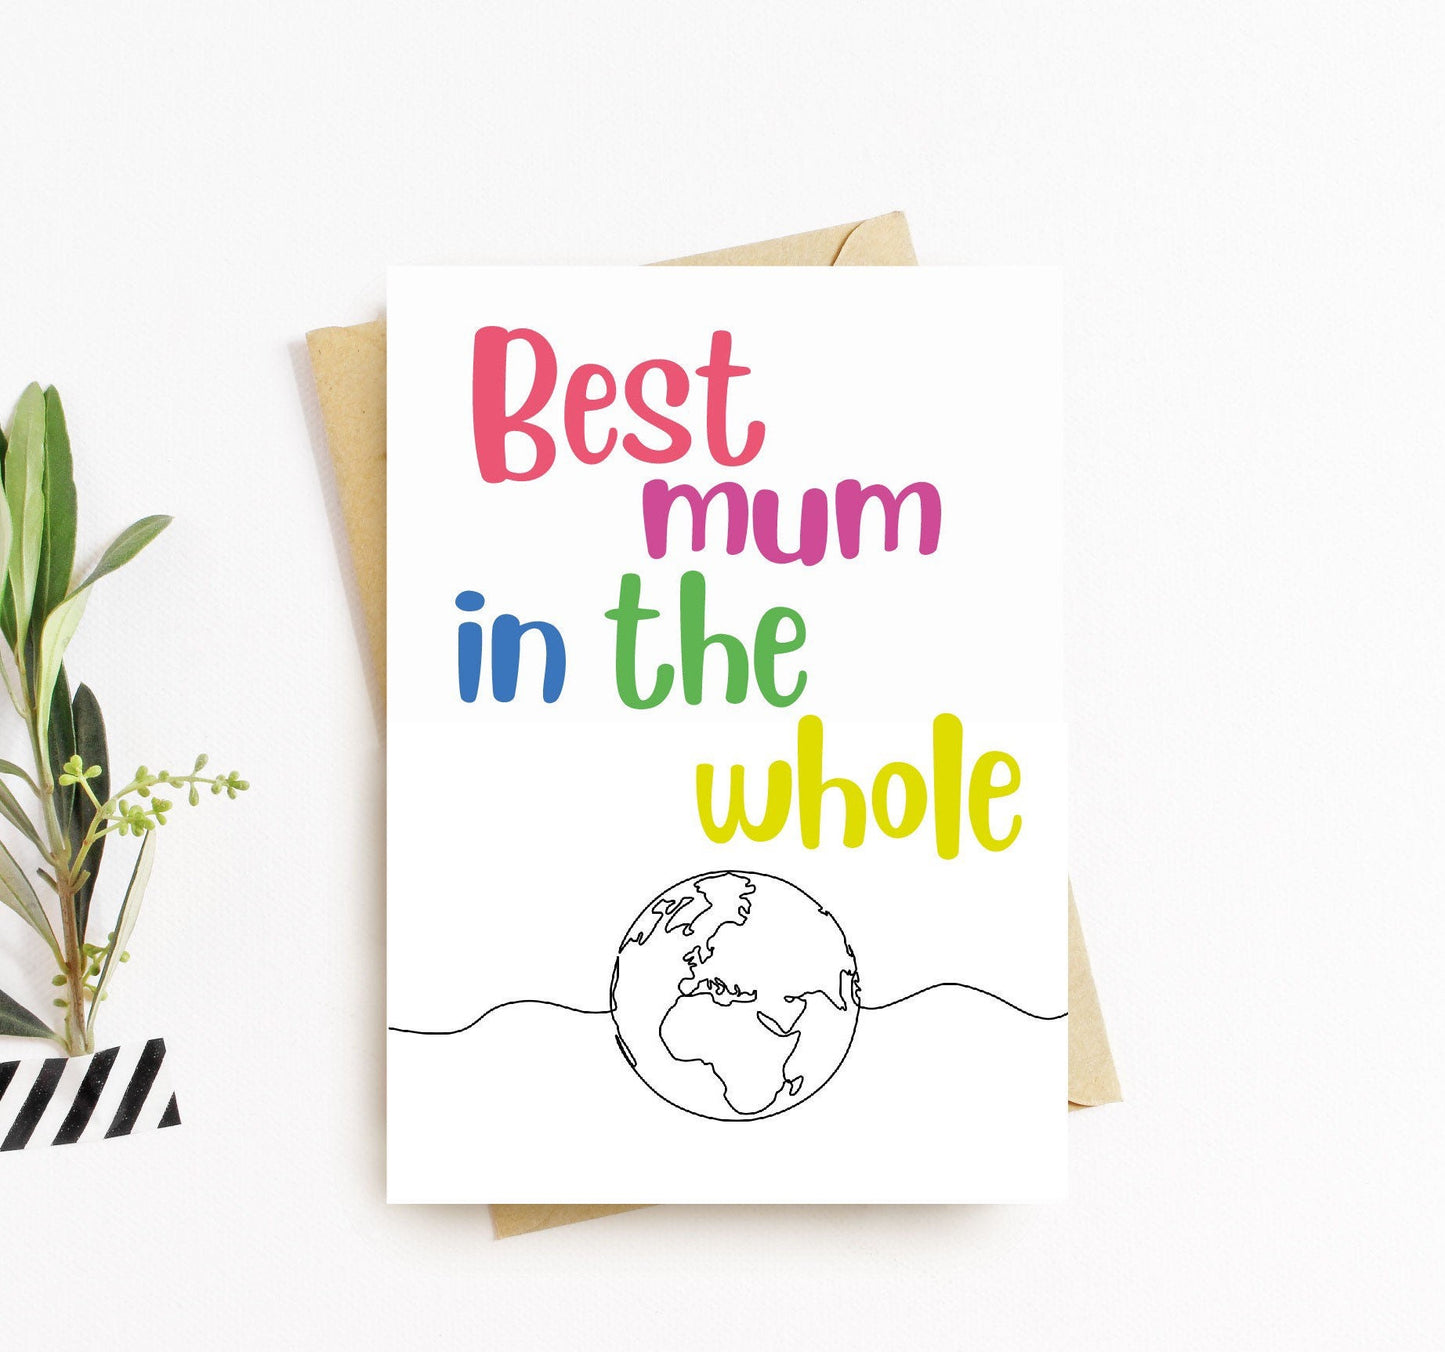 Best mum in the whole world Mother’s Day card from children. Nanny and grandma greeting cards, Mum birthday cards, Mothering Sunday 2021